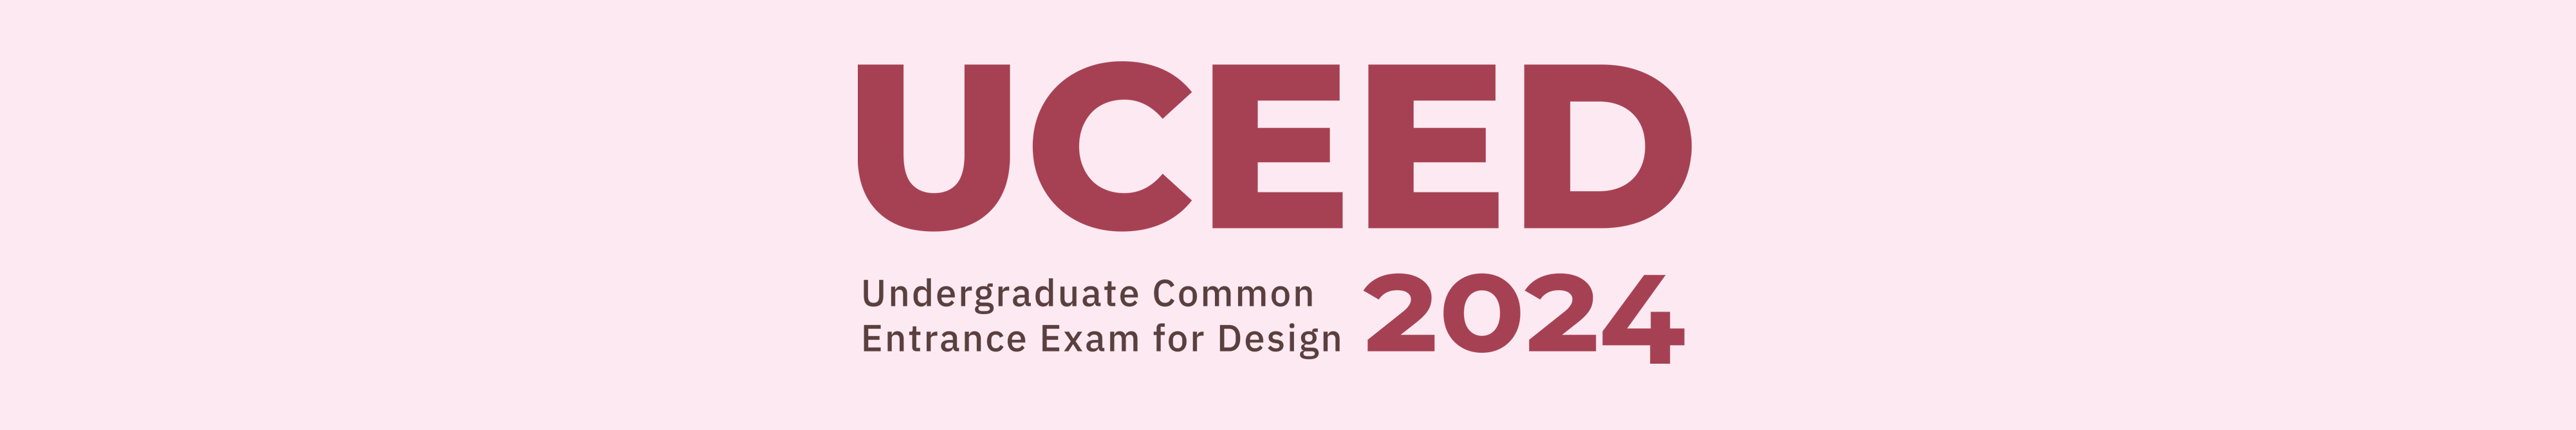 UCEED Page Header